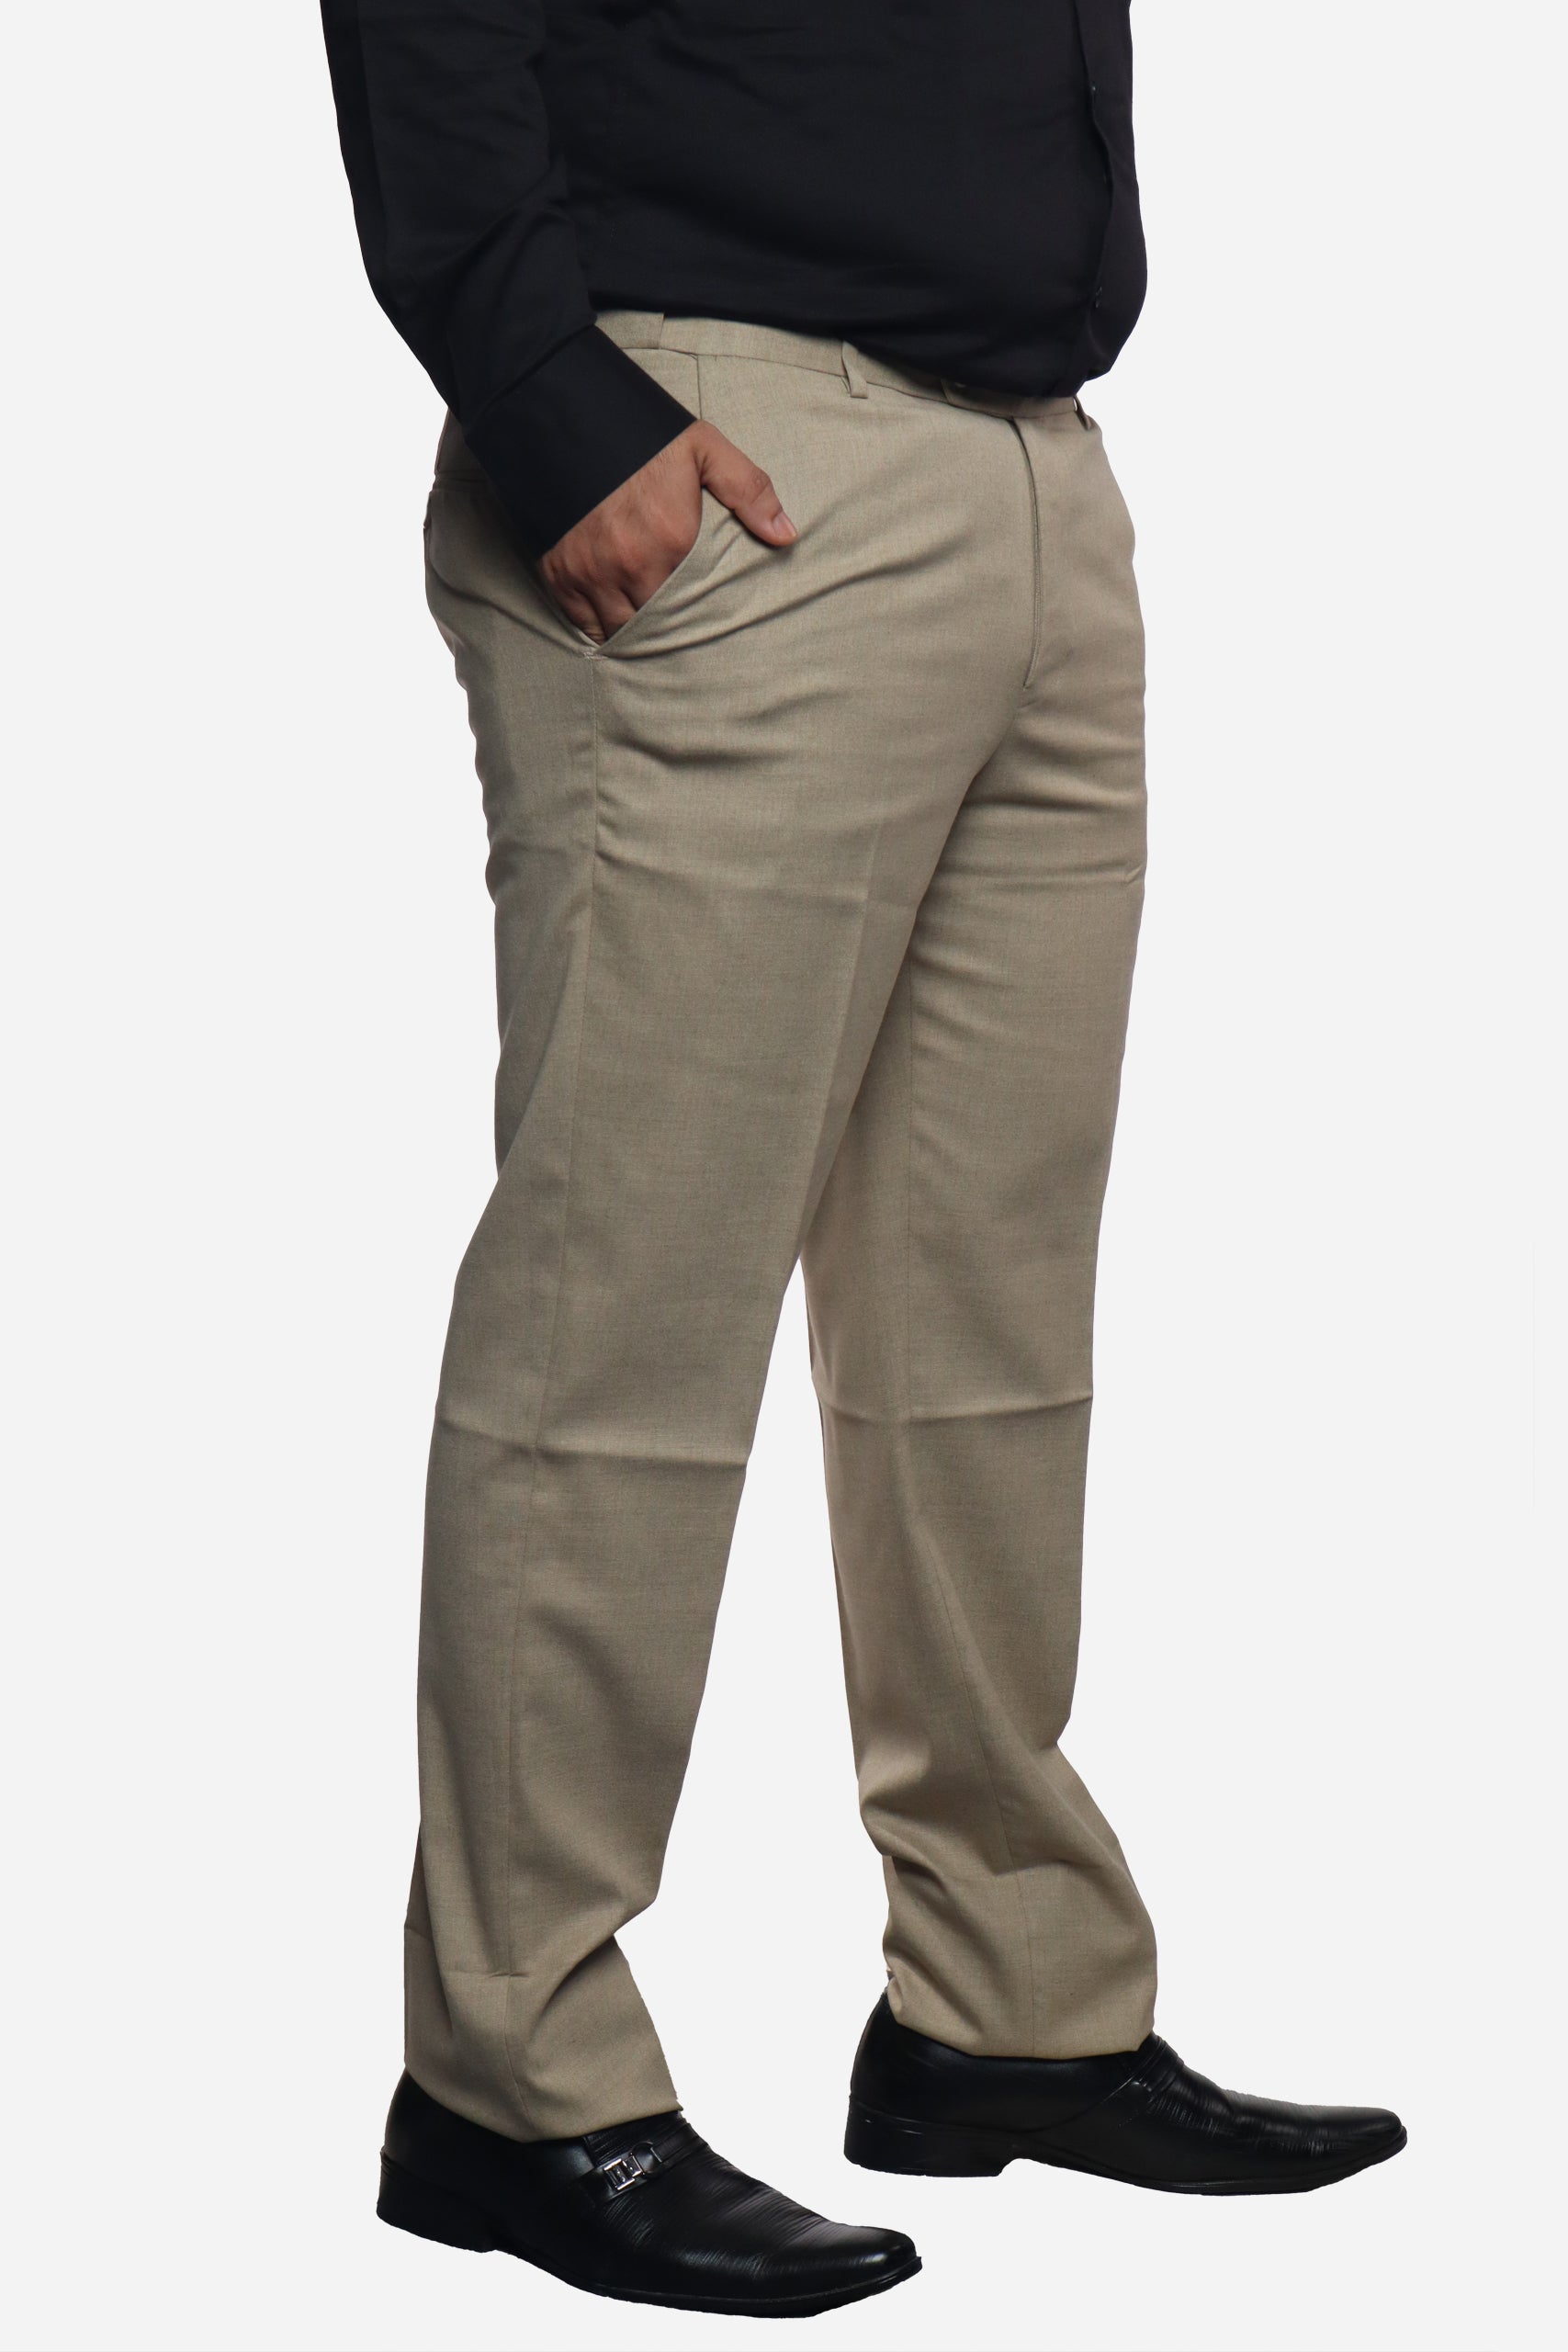 Flexiplus Straight Fit Pant Pro at Best Prices in India